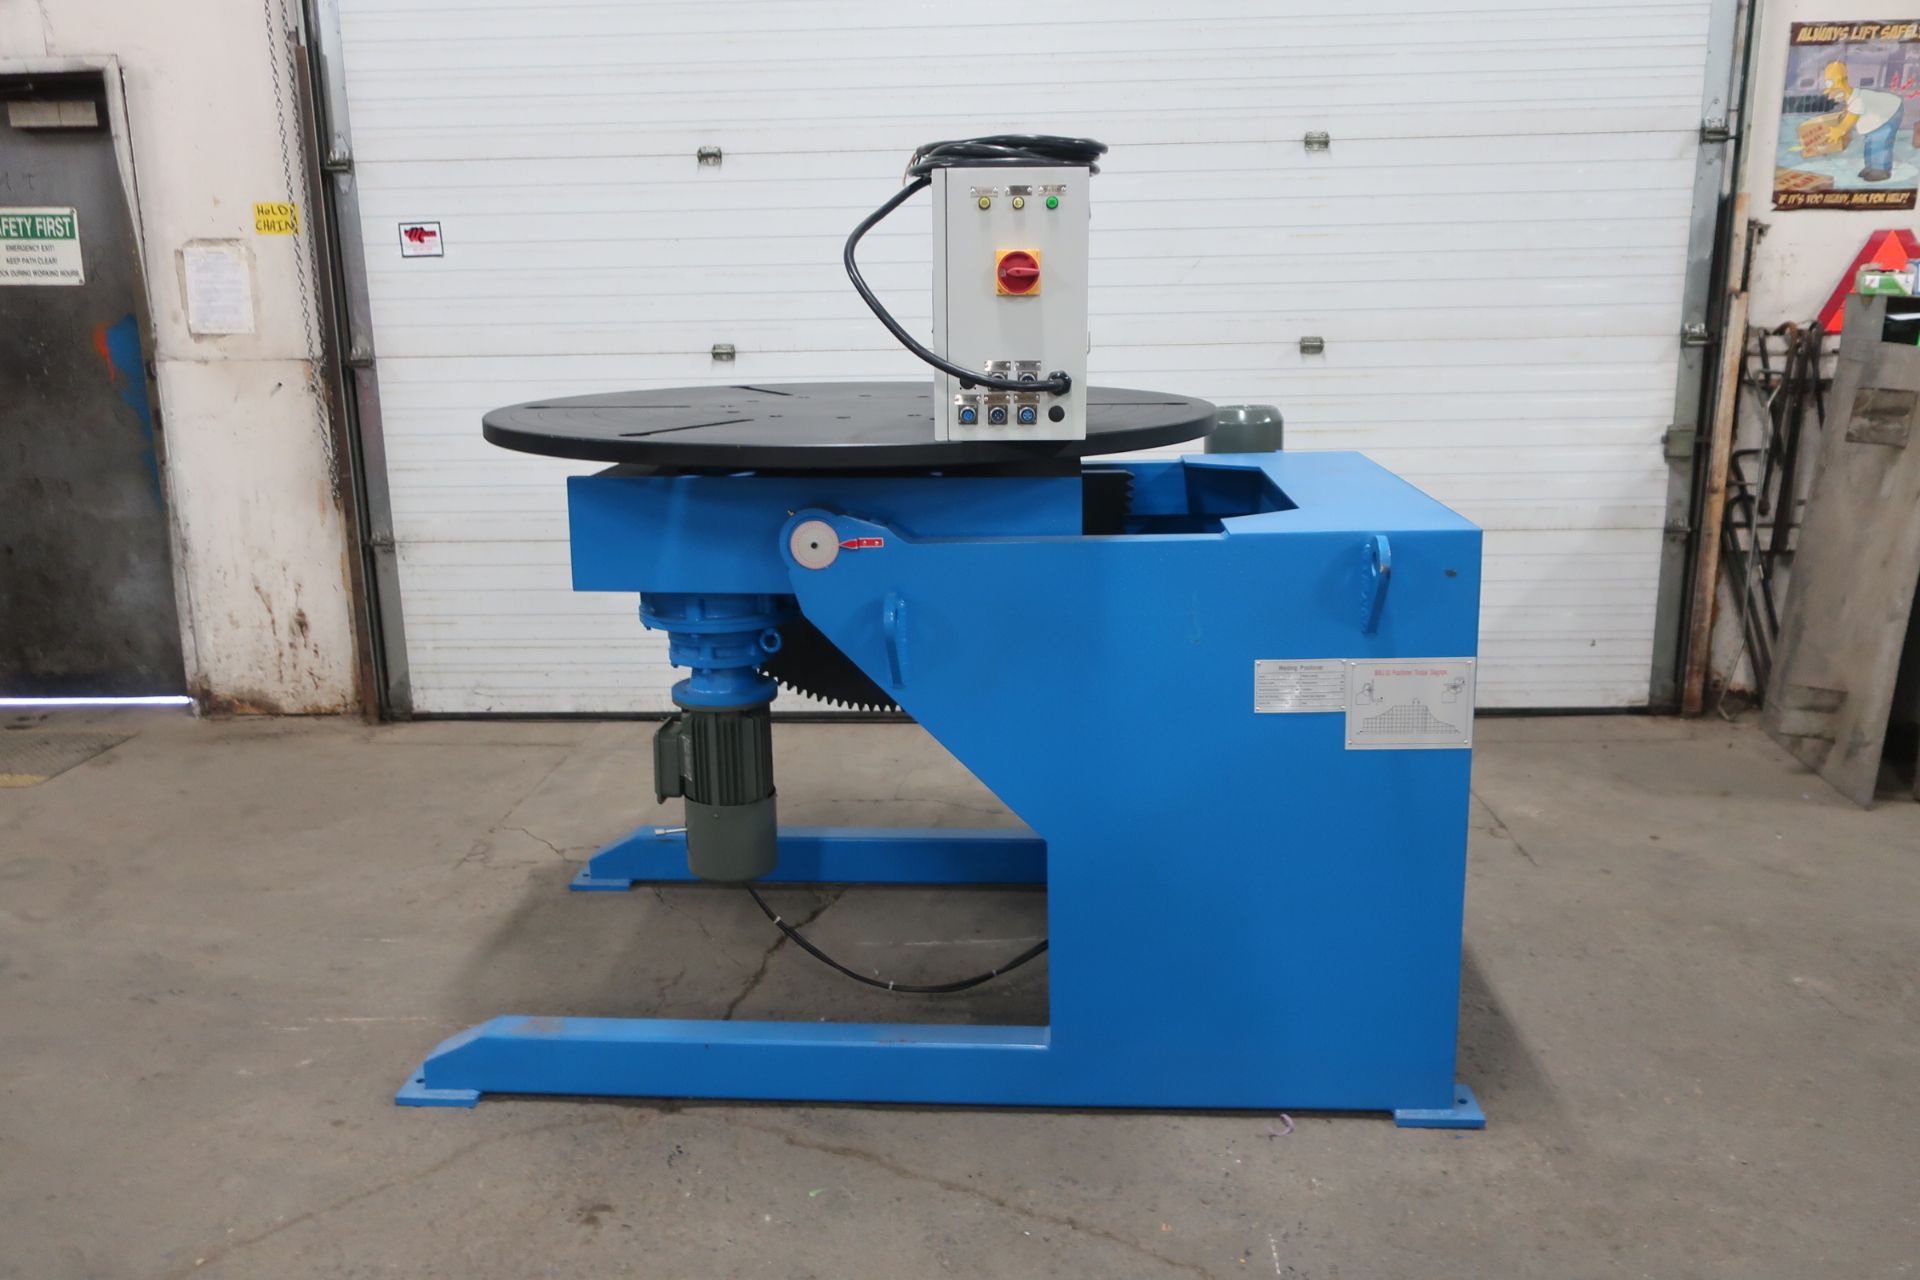 BWJ-30 WELDING POSITIONER 3000kg or 6600lbs capacity - tilt and rotate with variable speed drive and